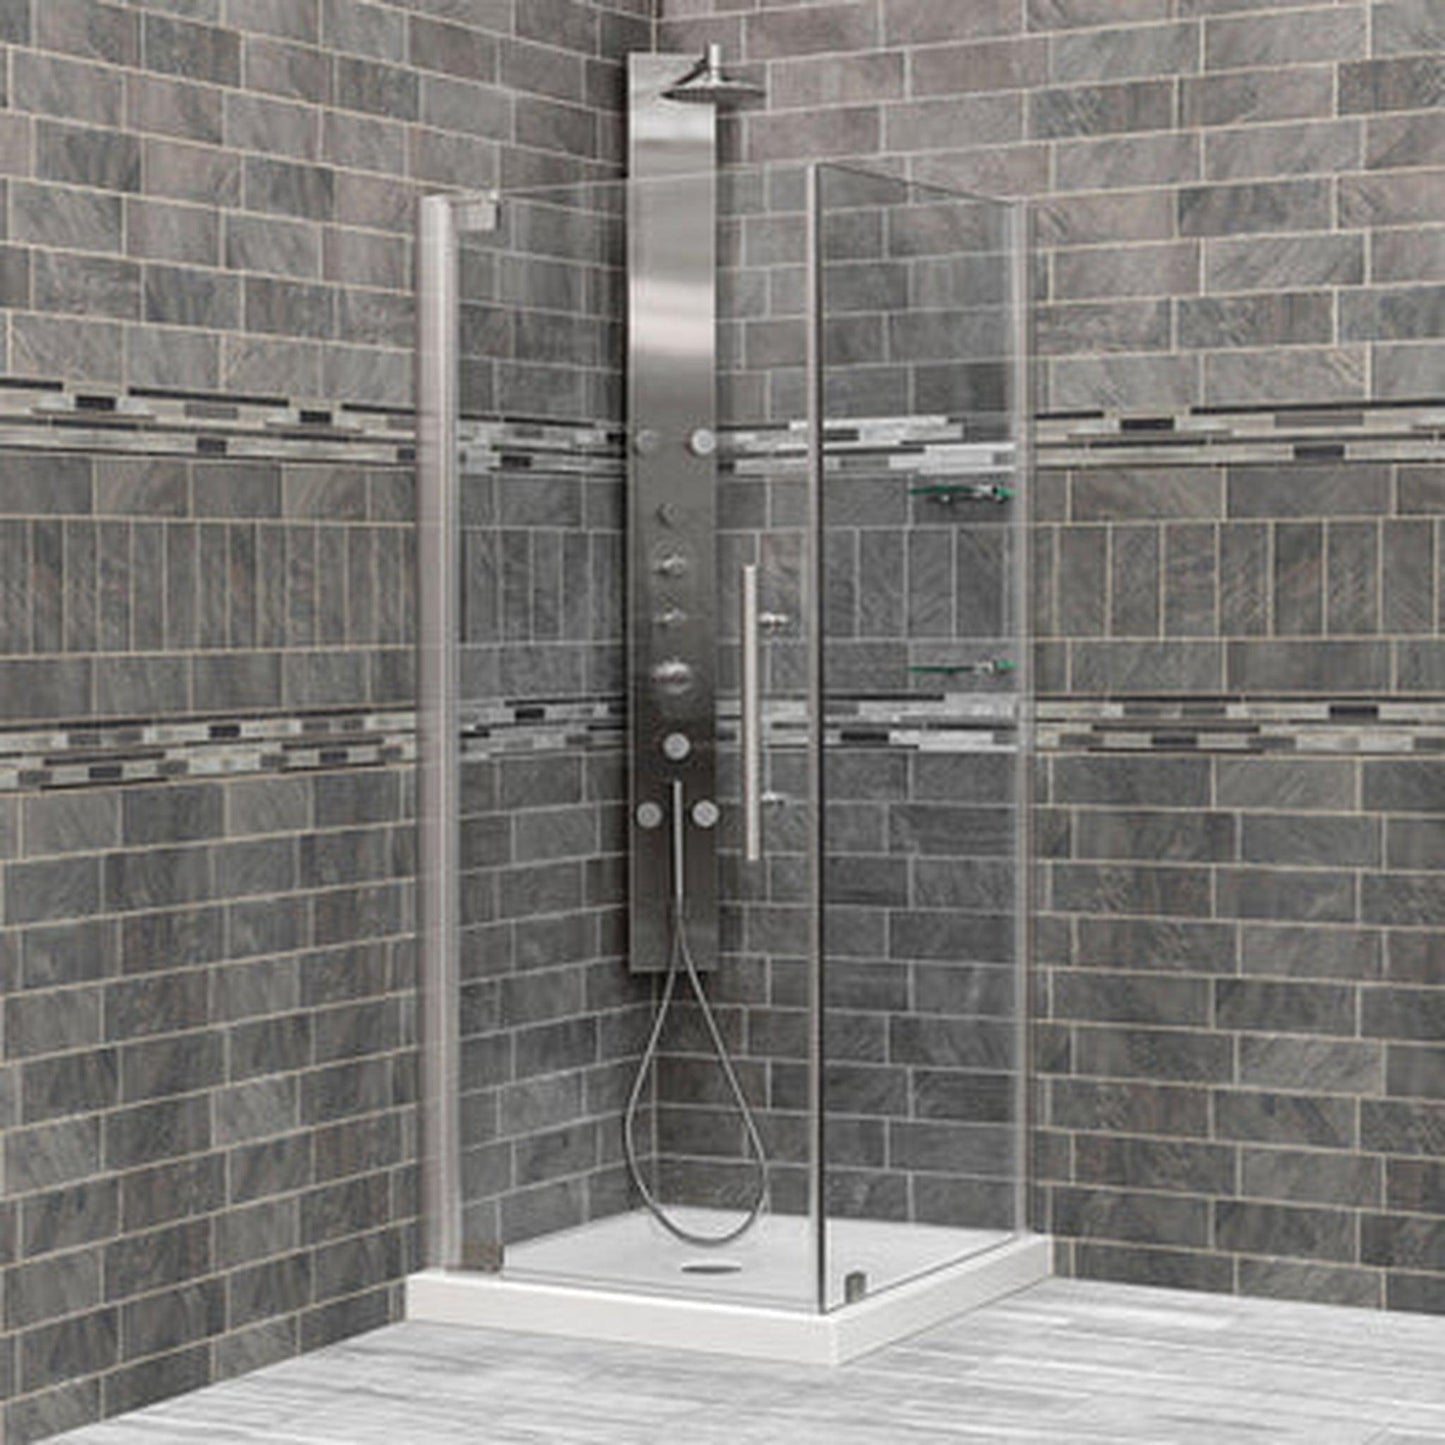 LessCare Ultra-G 29 3/8-30" x 72" x 29-30" Chrome Swing-Out Shower Enclosure